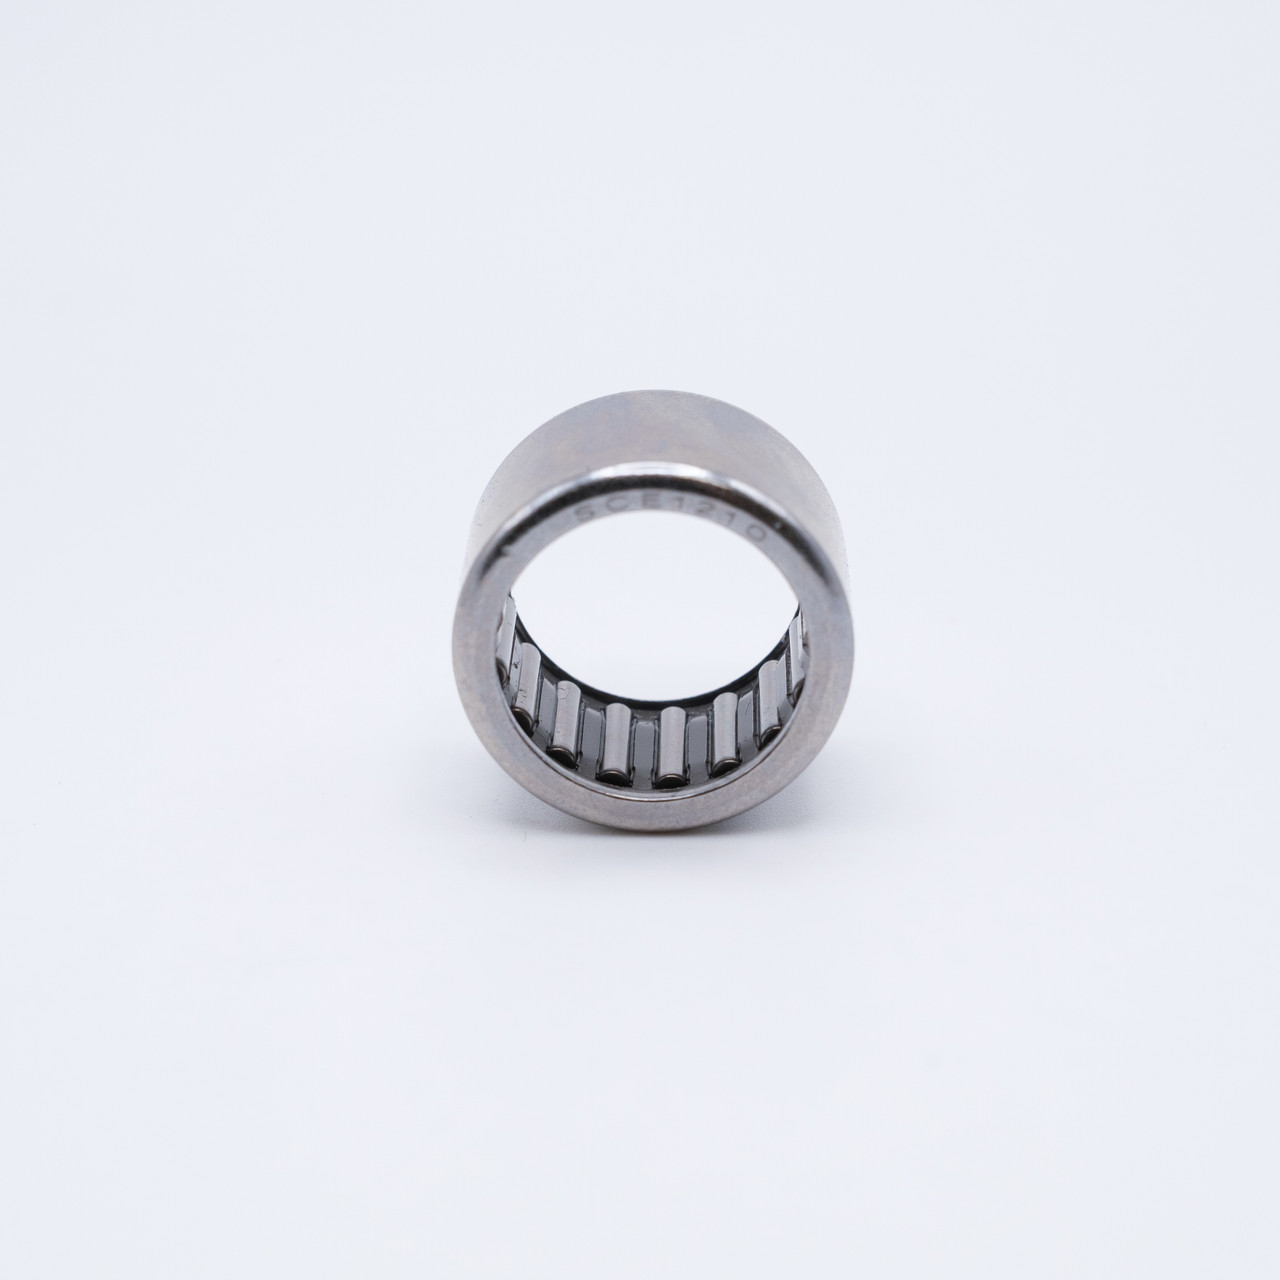 BA186 Needle Rollers Bearing 1-1/8x1-3/8x3/8 Front View